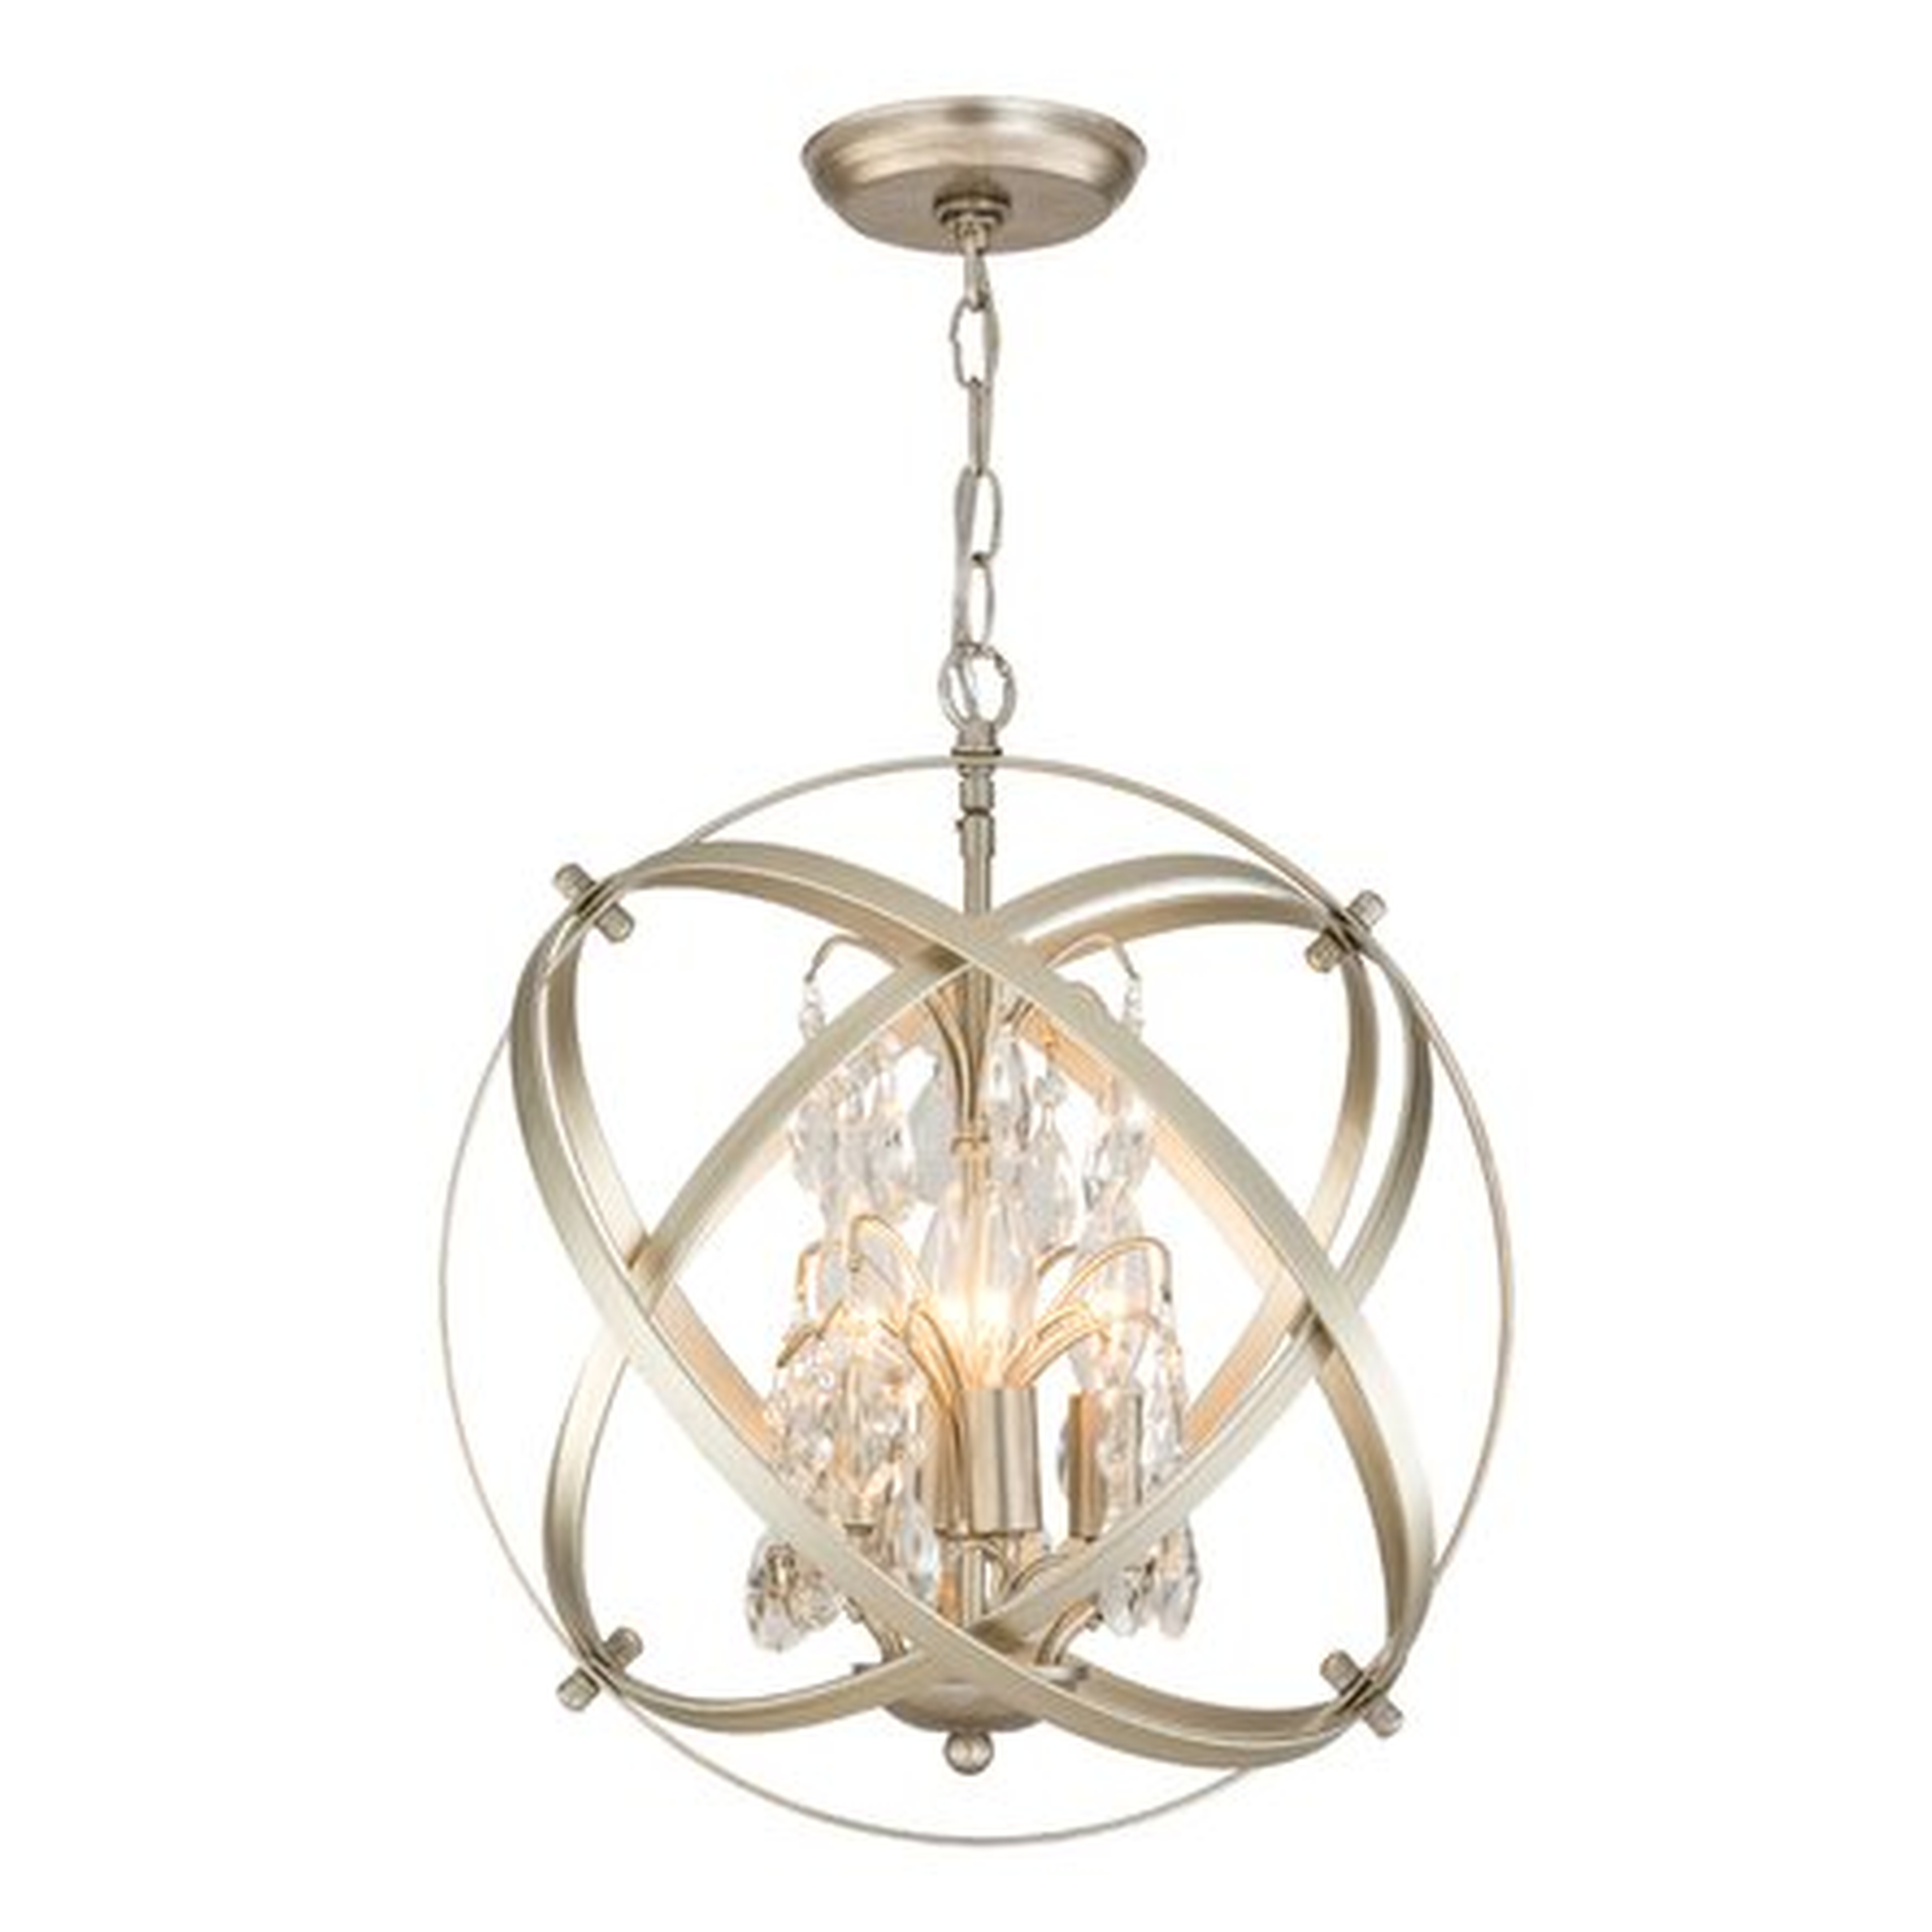 Chally 4 - Light Unique Globe Chandelier with Crystal Accents - Wayfair